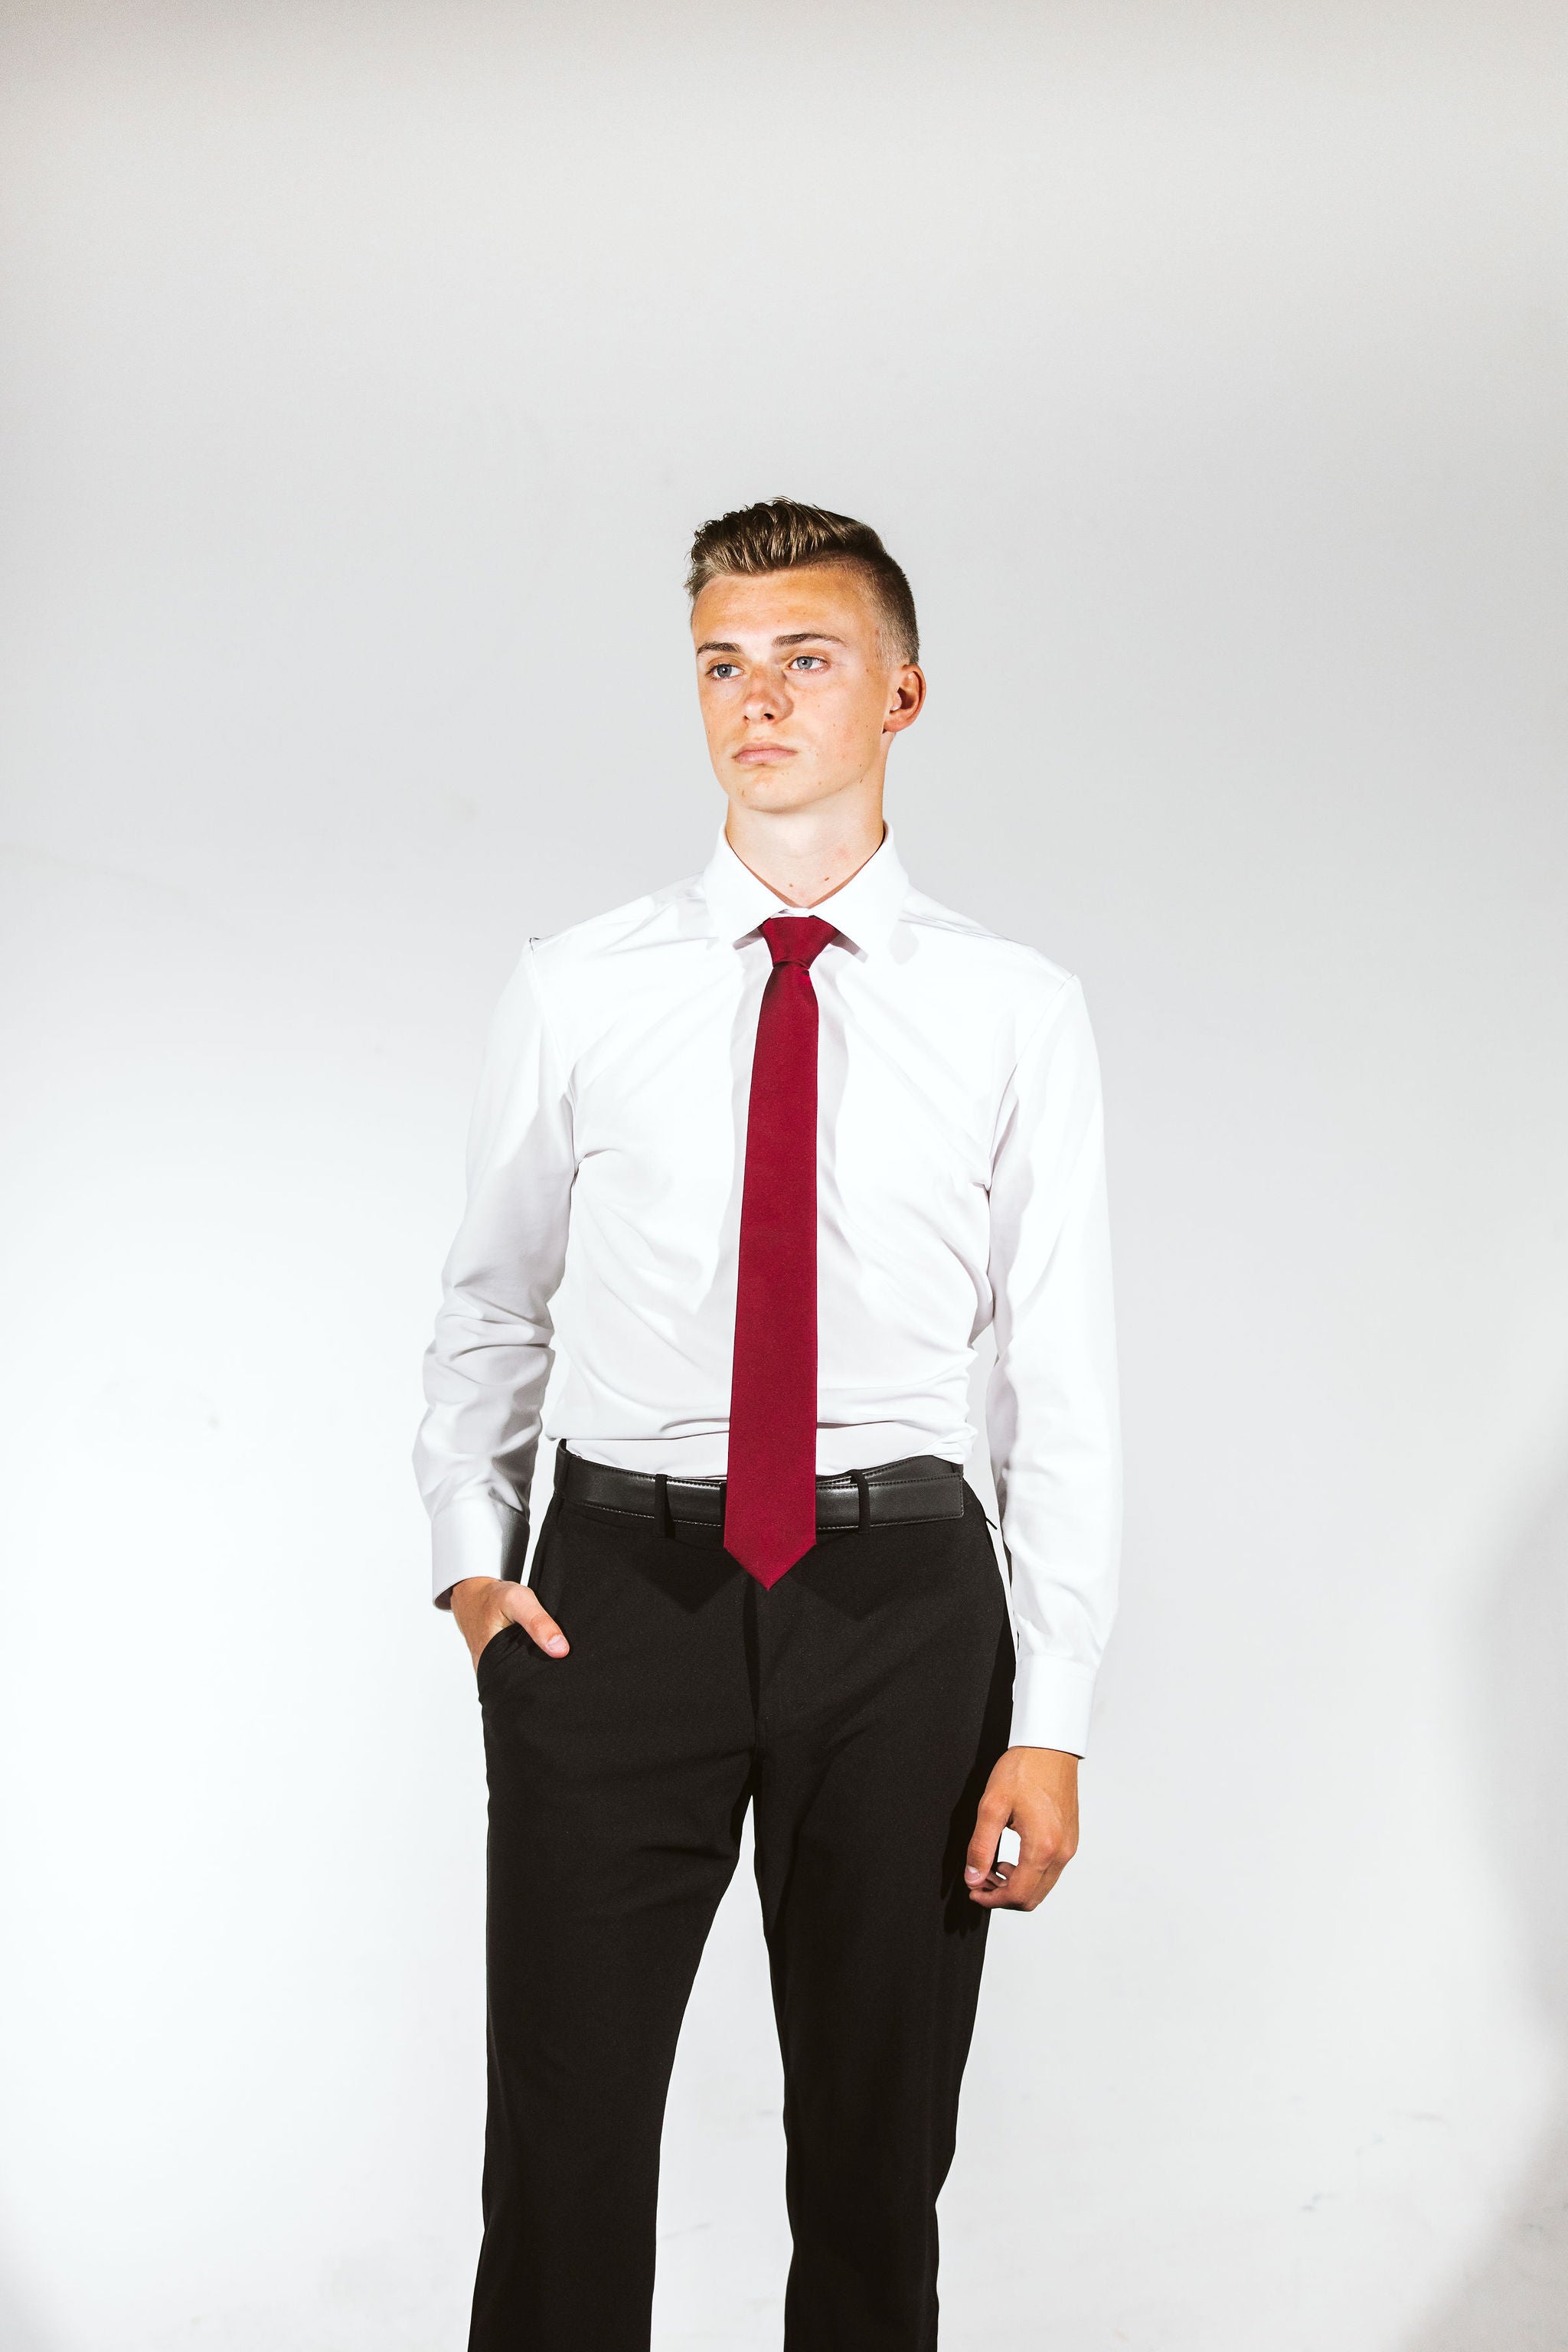 Tips for Picking the Perfect Business Casual Outfit from Truwear